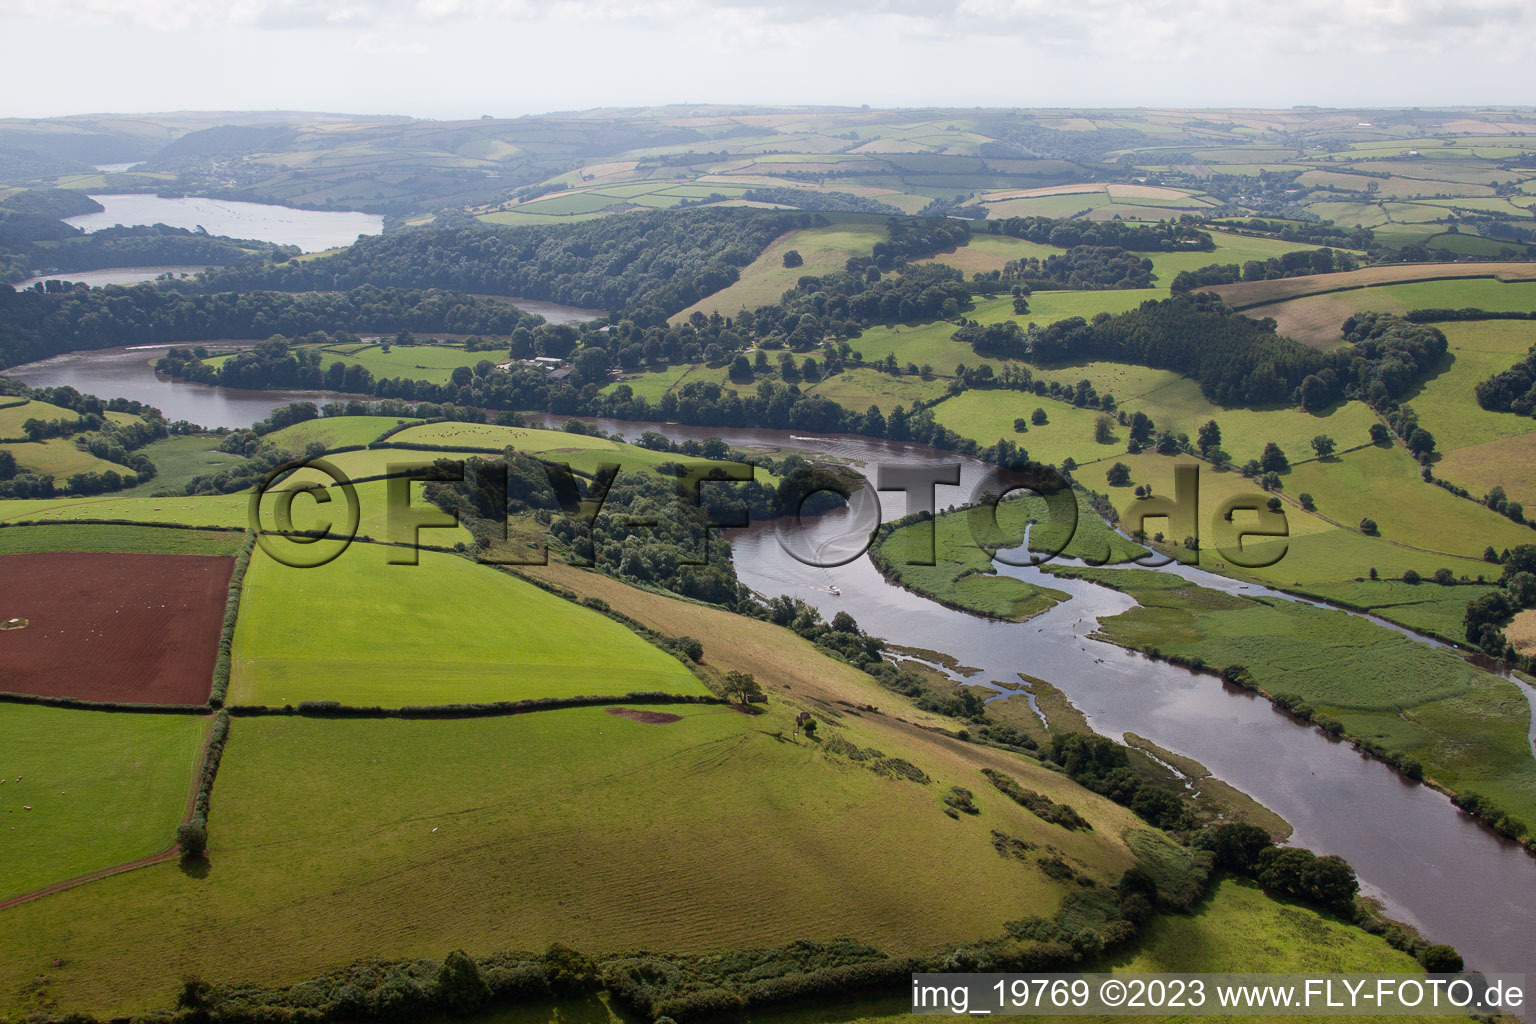 Bird's eye view of Berry Pomeroy in the state England, Great Britain